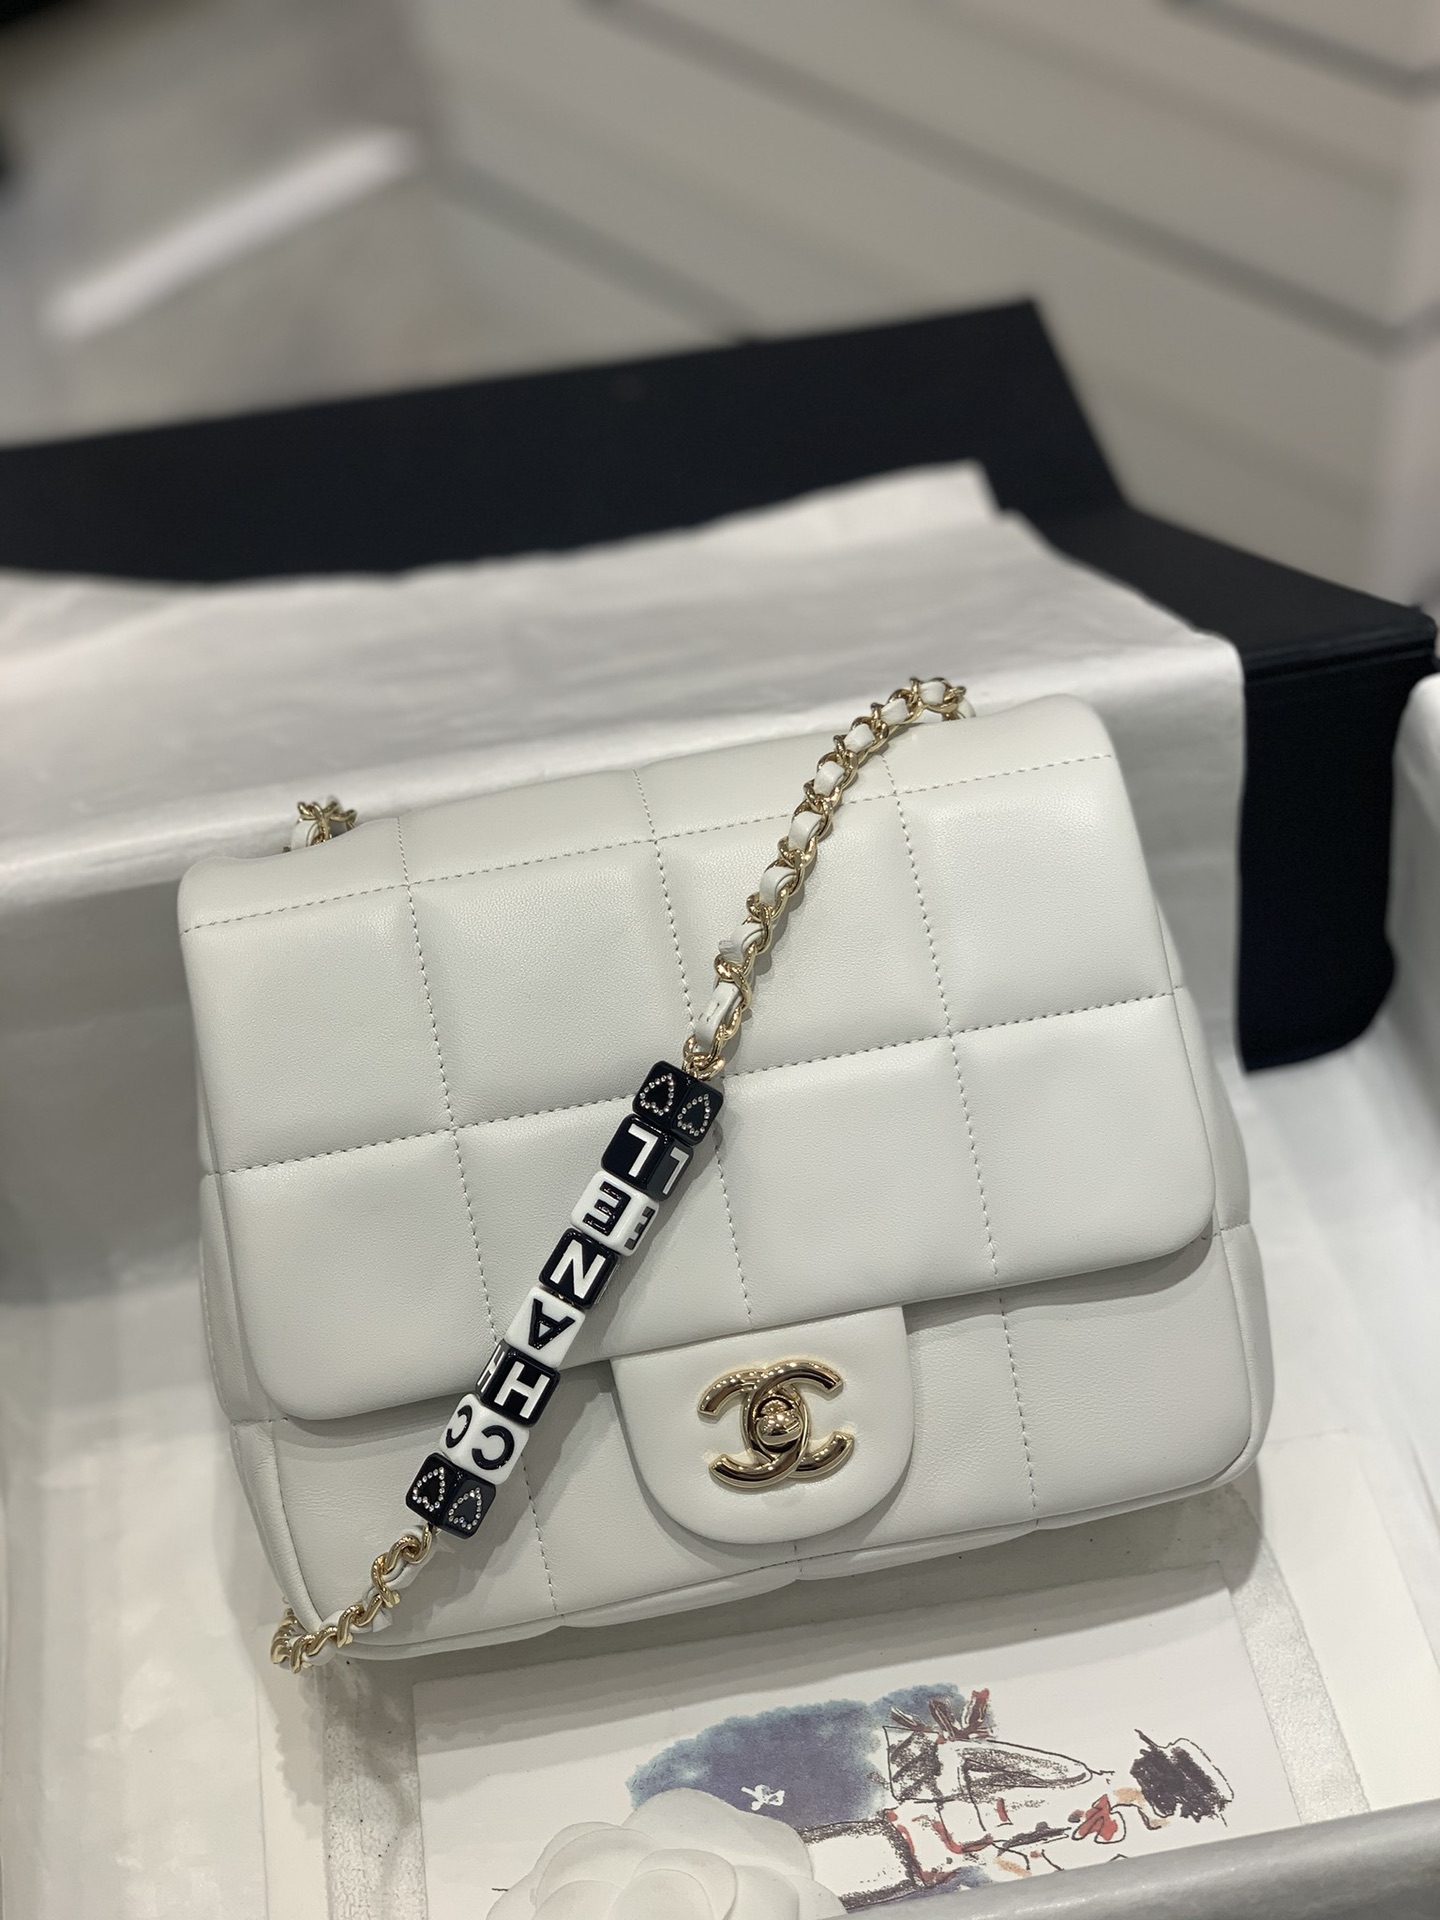 Chanel Crossbody & Shoulder Bags Black Blue White Spring Collection Chains